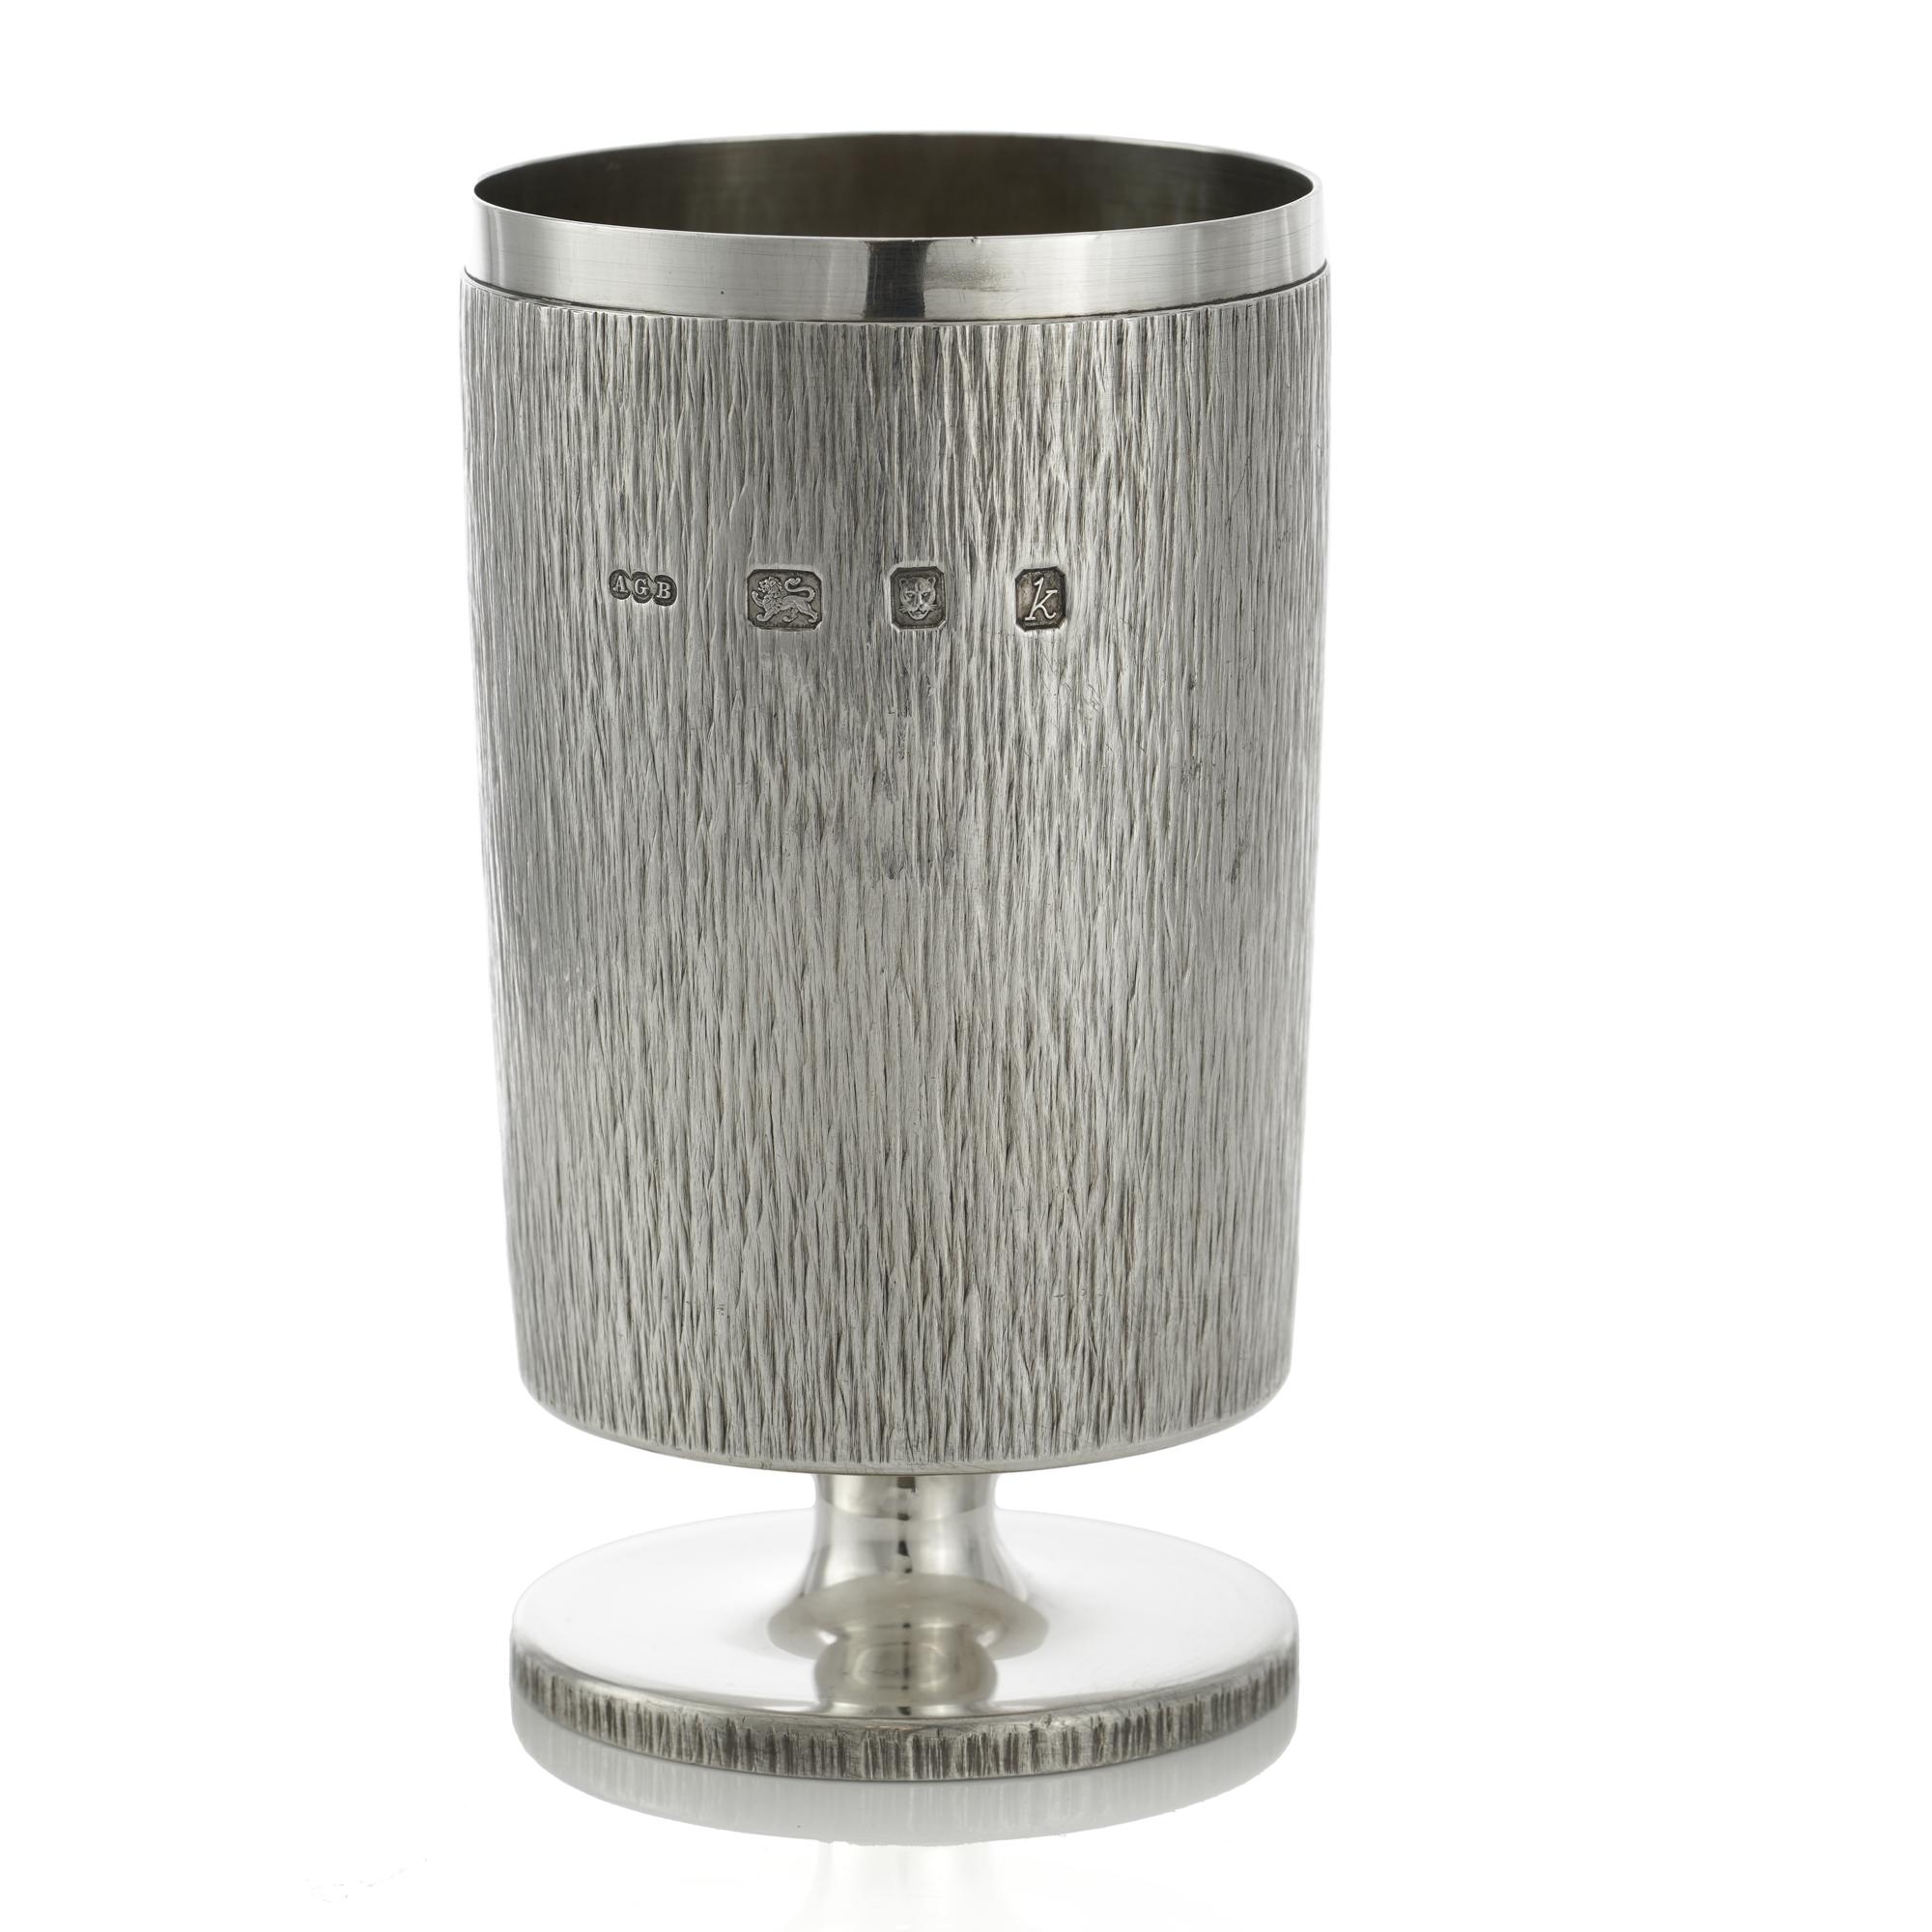 Gerald Benney vintage hammer finish design sterling silver goblet.
Made in England, London, 1965
Fully hallmarked.

Approx. Dimensions -
Diameter x height: 7 x 12.7 cm
Weight: 343 grams in total.

Condition: Goblet is general used, has age